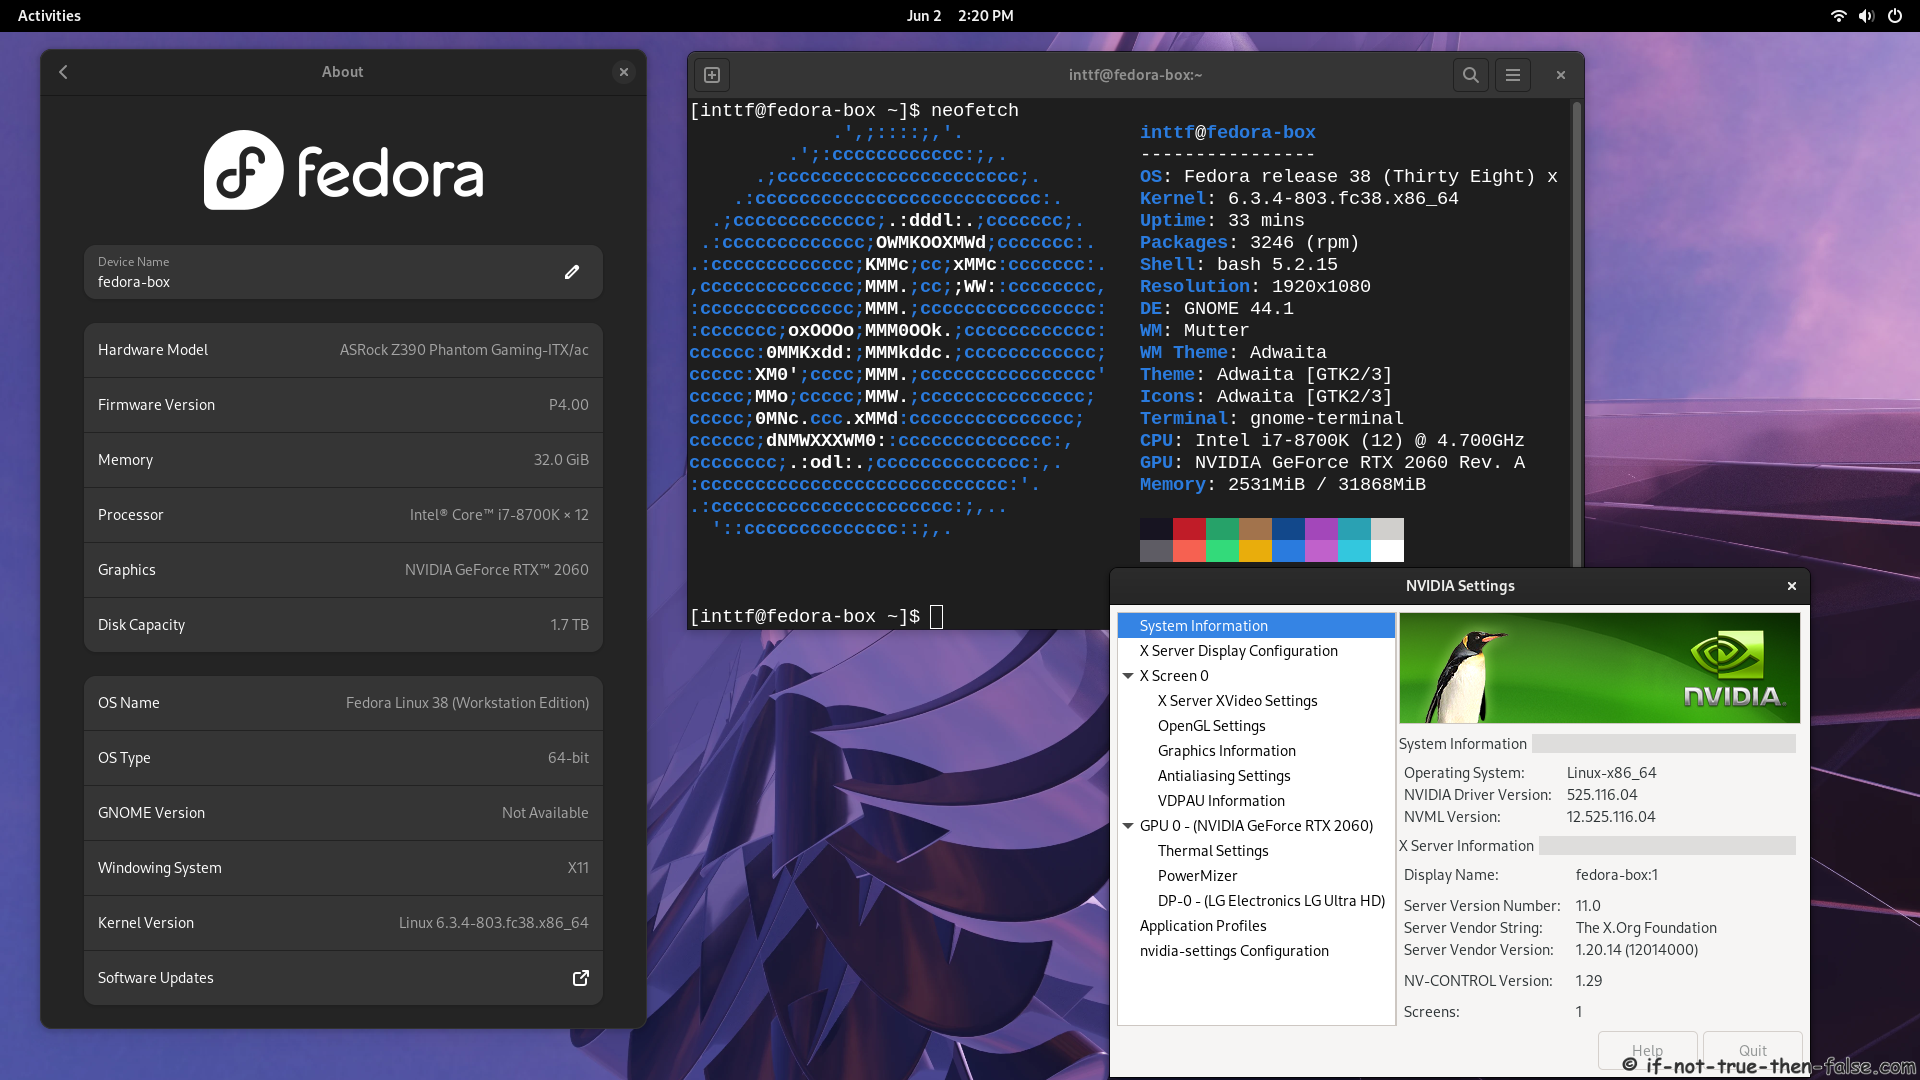 NVIDIA 525.116.04 Drivers on Fedora 38 Gnome 44 with Kernel 6.3.4